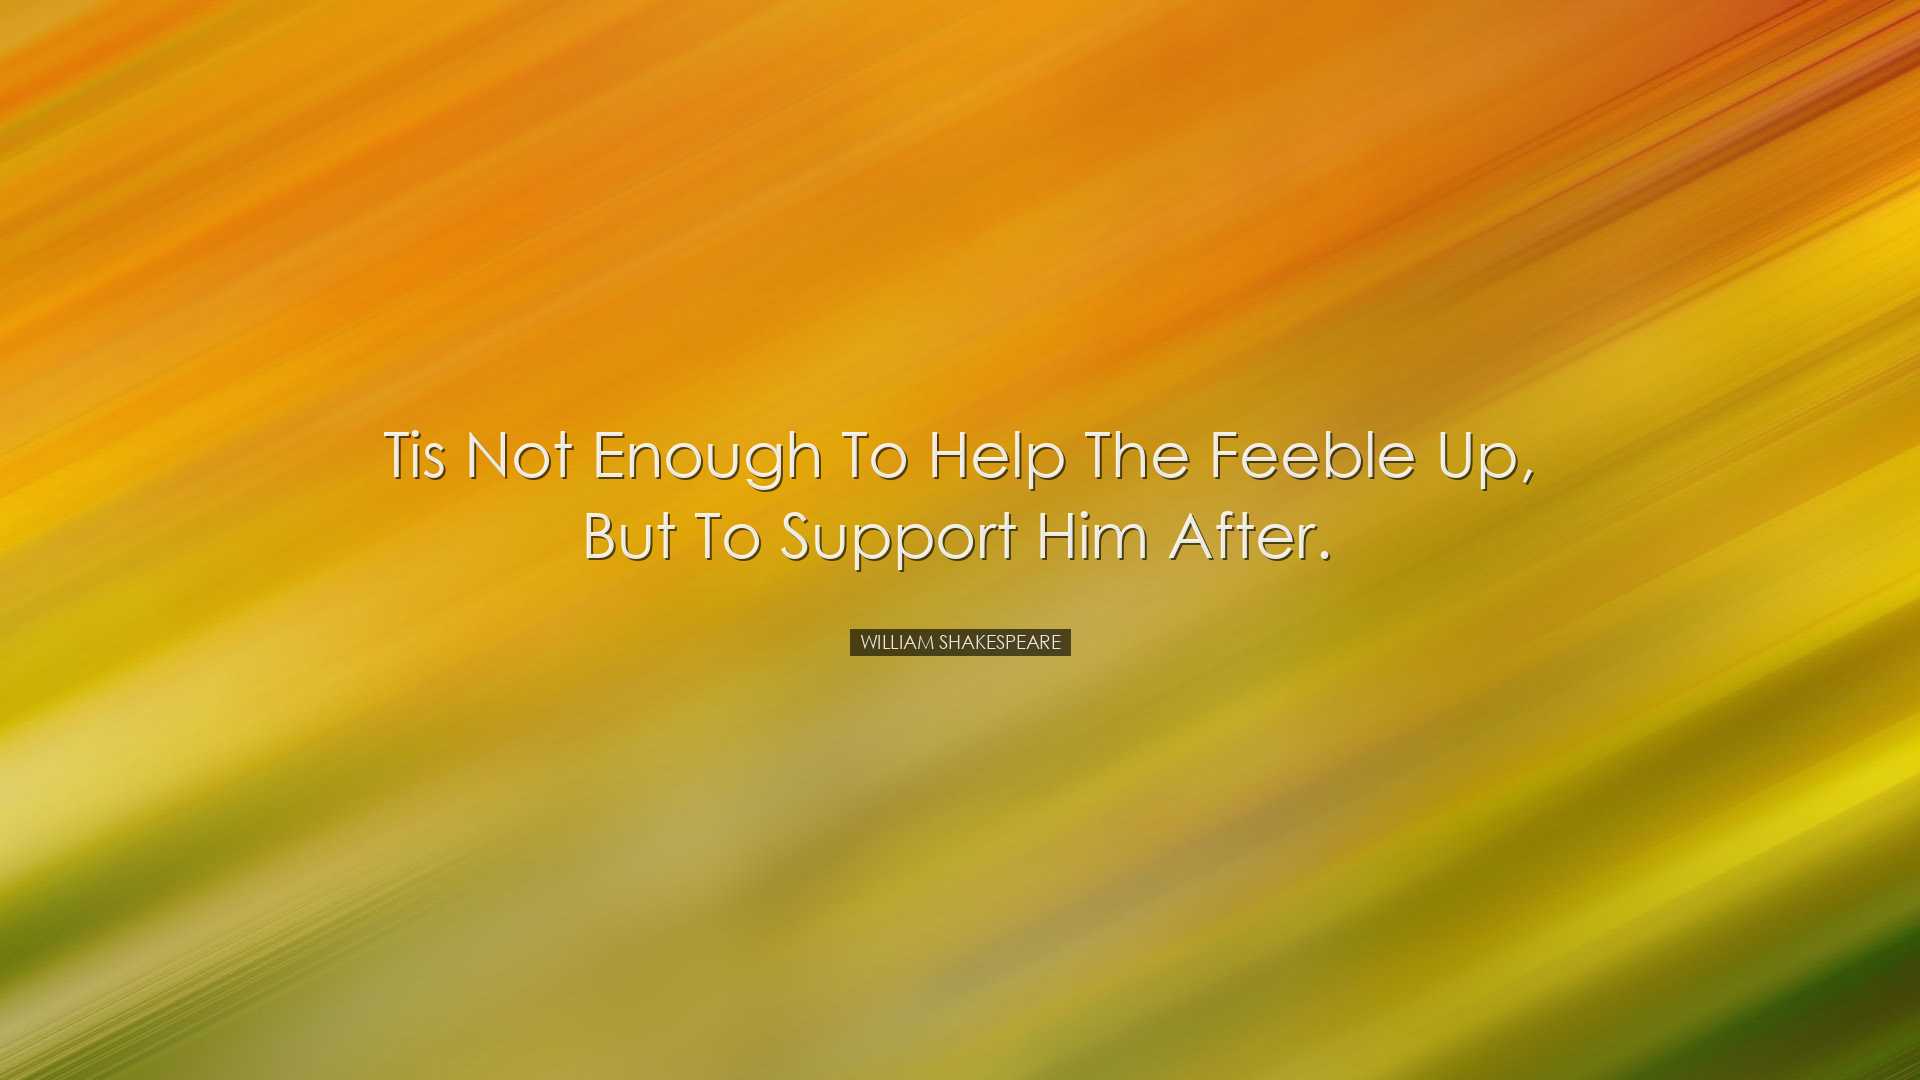 Tis not enough to help the feeble up, but to support him after. -